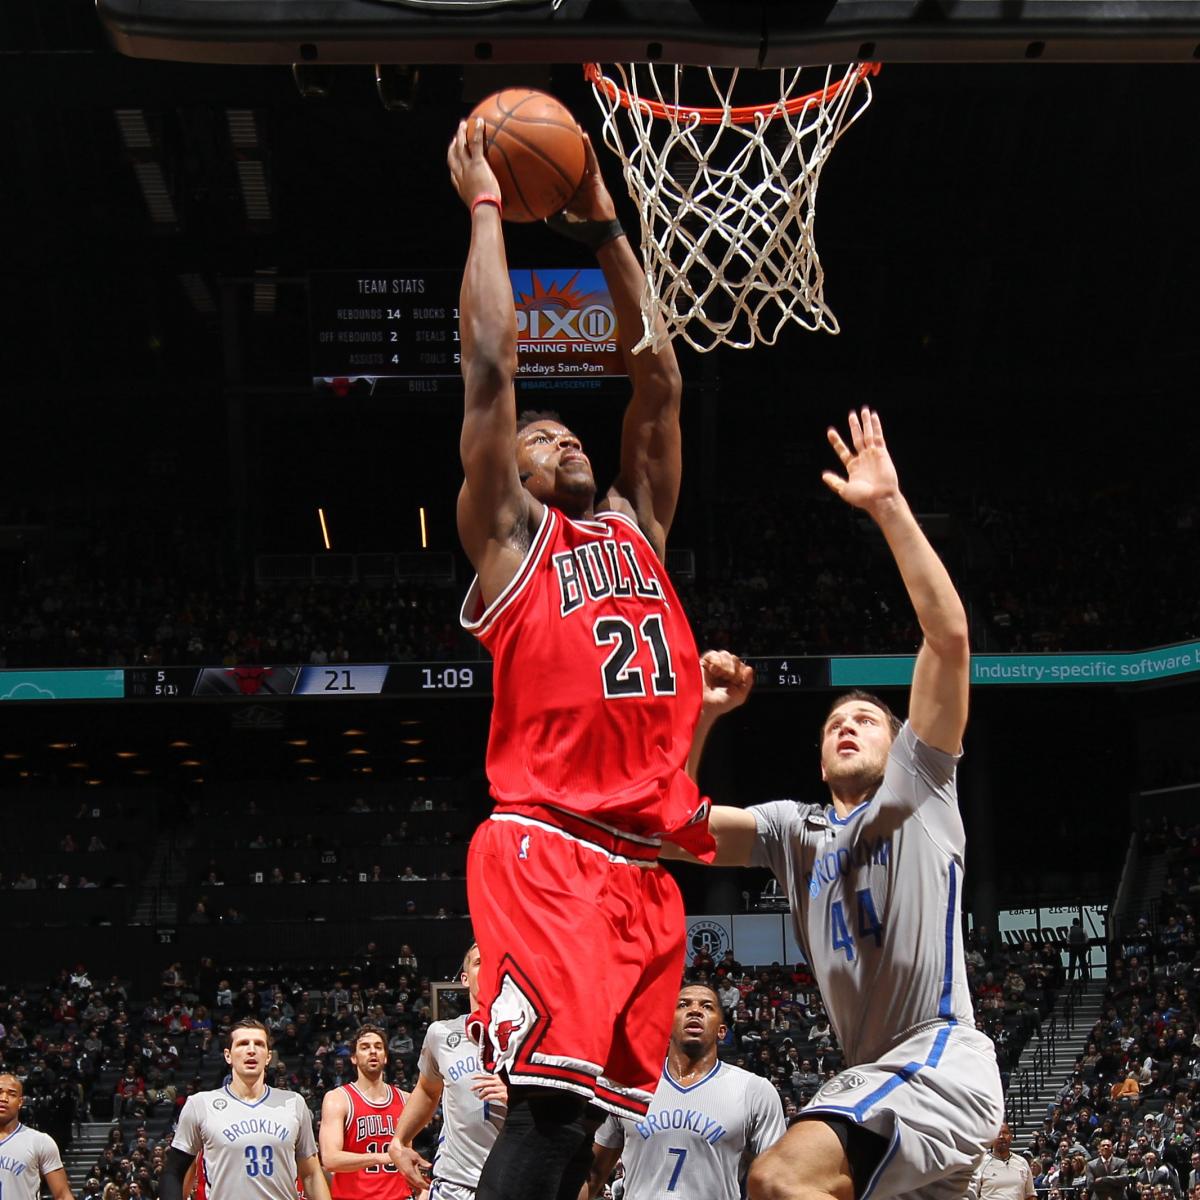 Derrick Rose of the Chicago Bulls slams home a dunk late in a victory  News Photo - Getty Images